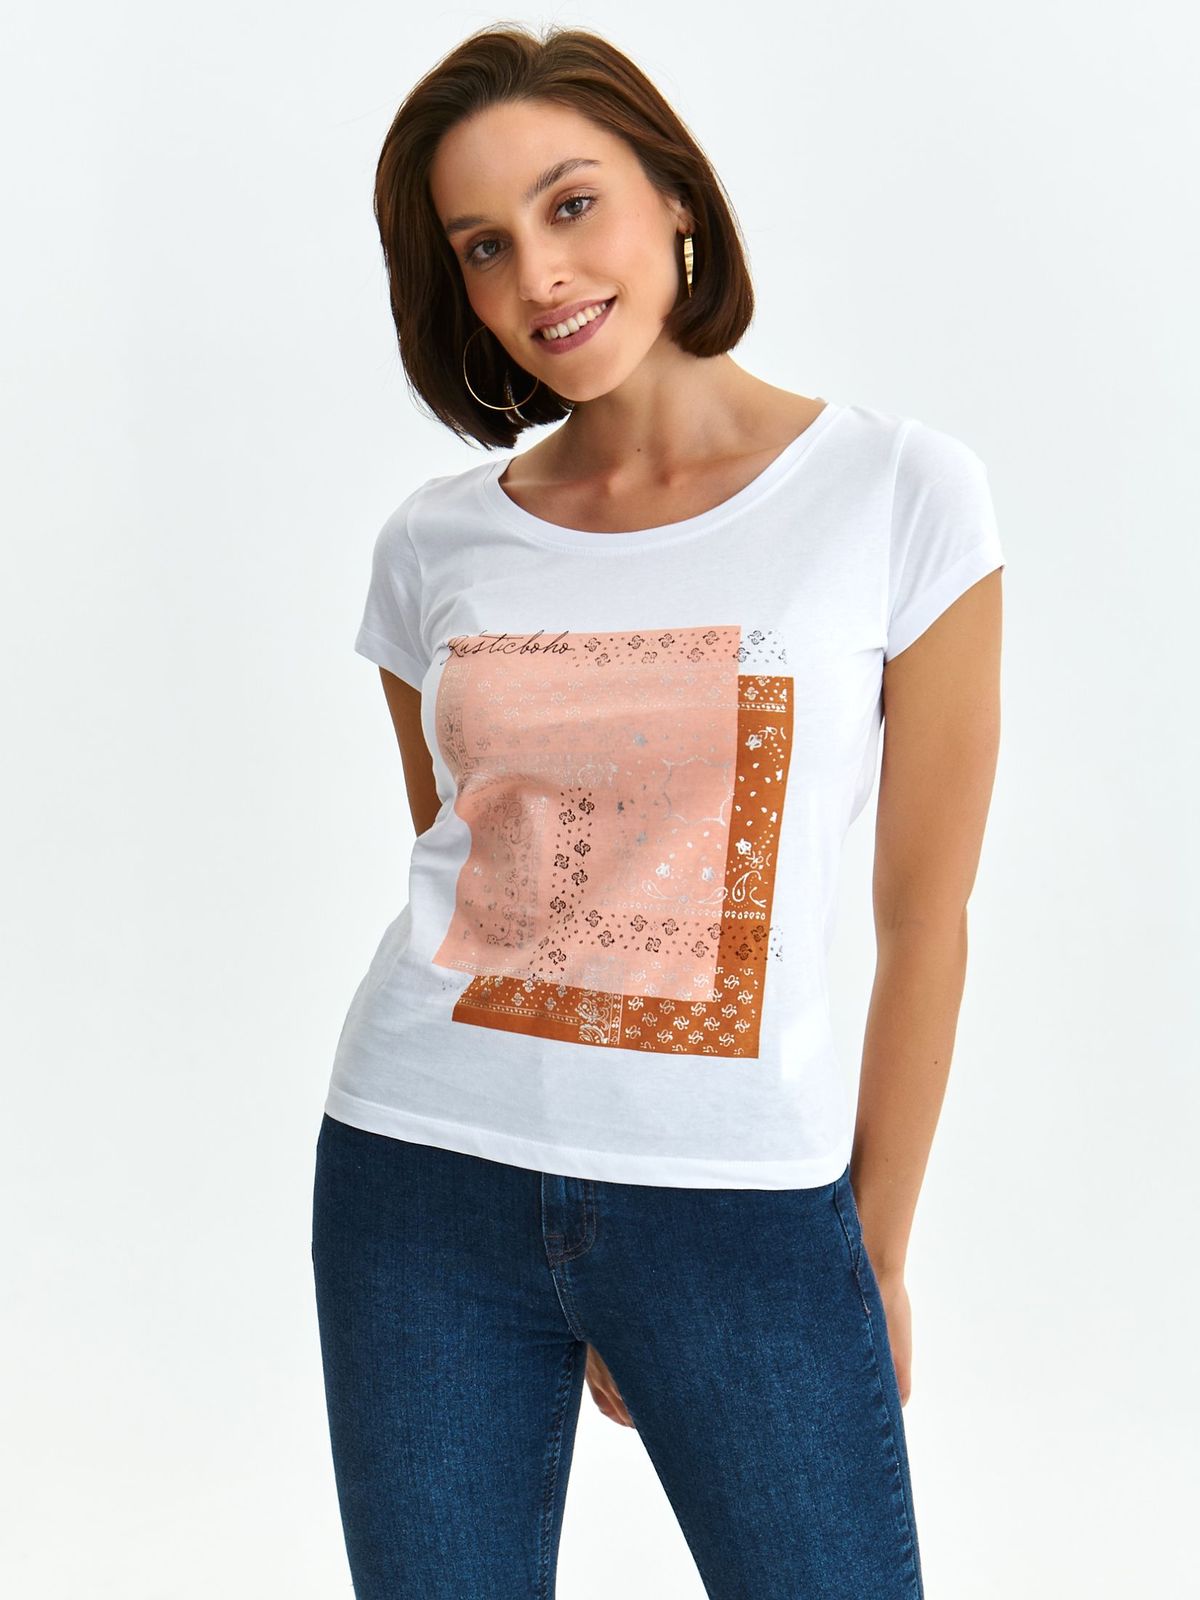 White t-shirt cotton loose fit with print details